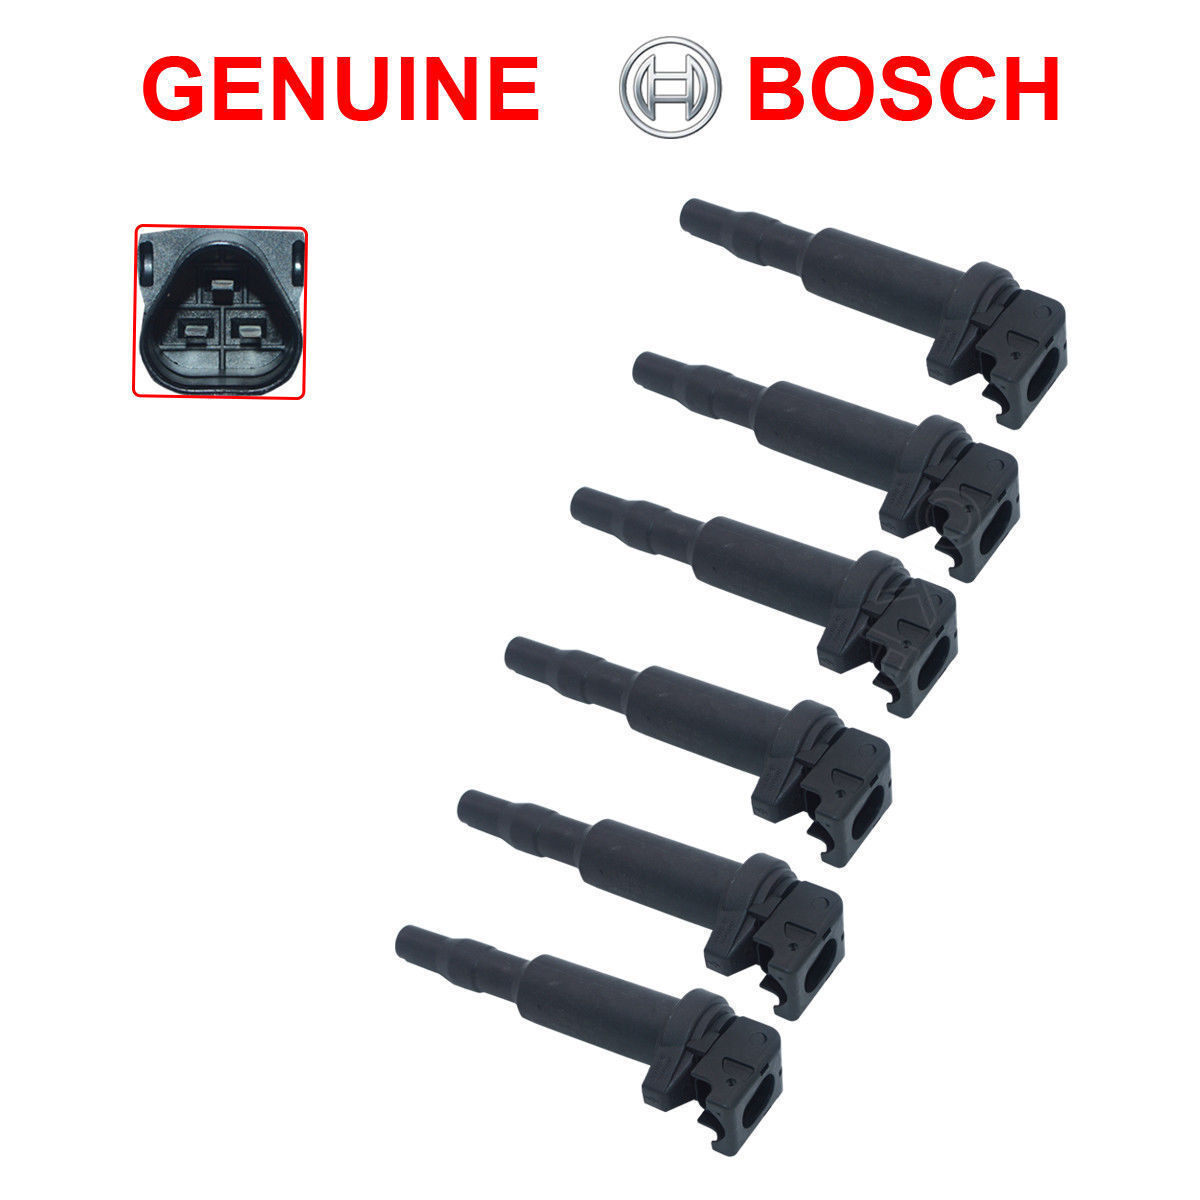 NEW BMW Ignition Coil 6 Pack Updated W/ Connector Boot Genuine Bosch 0221504470